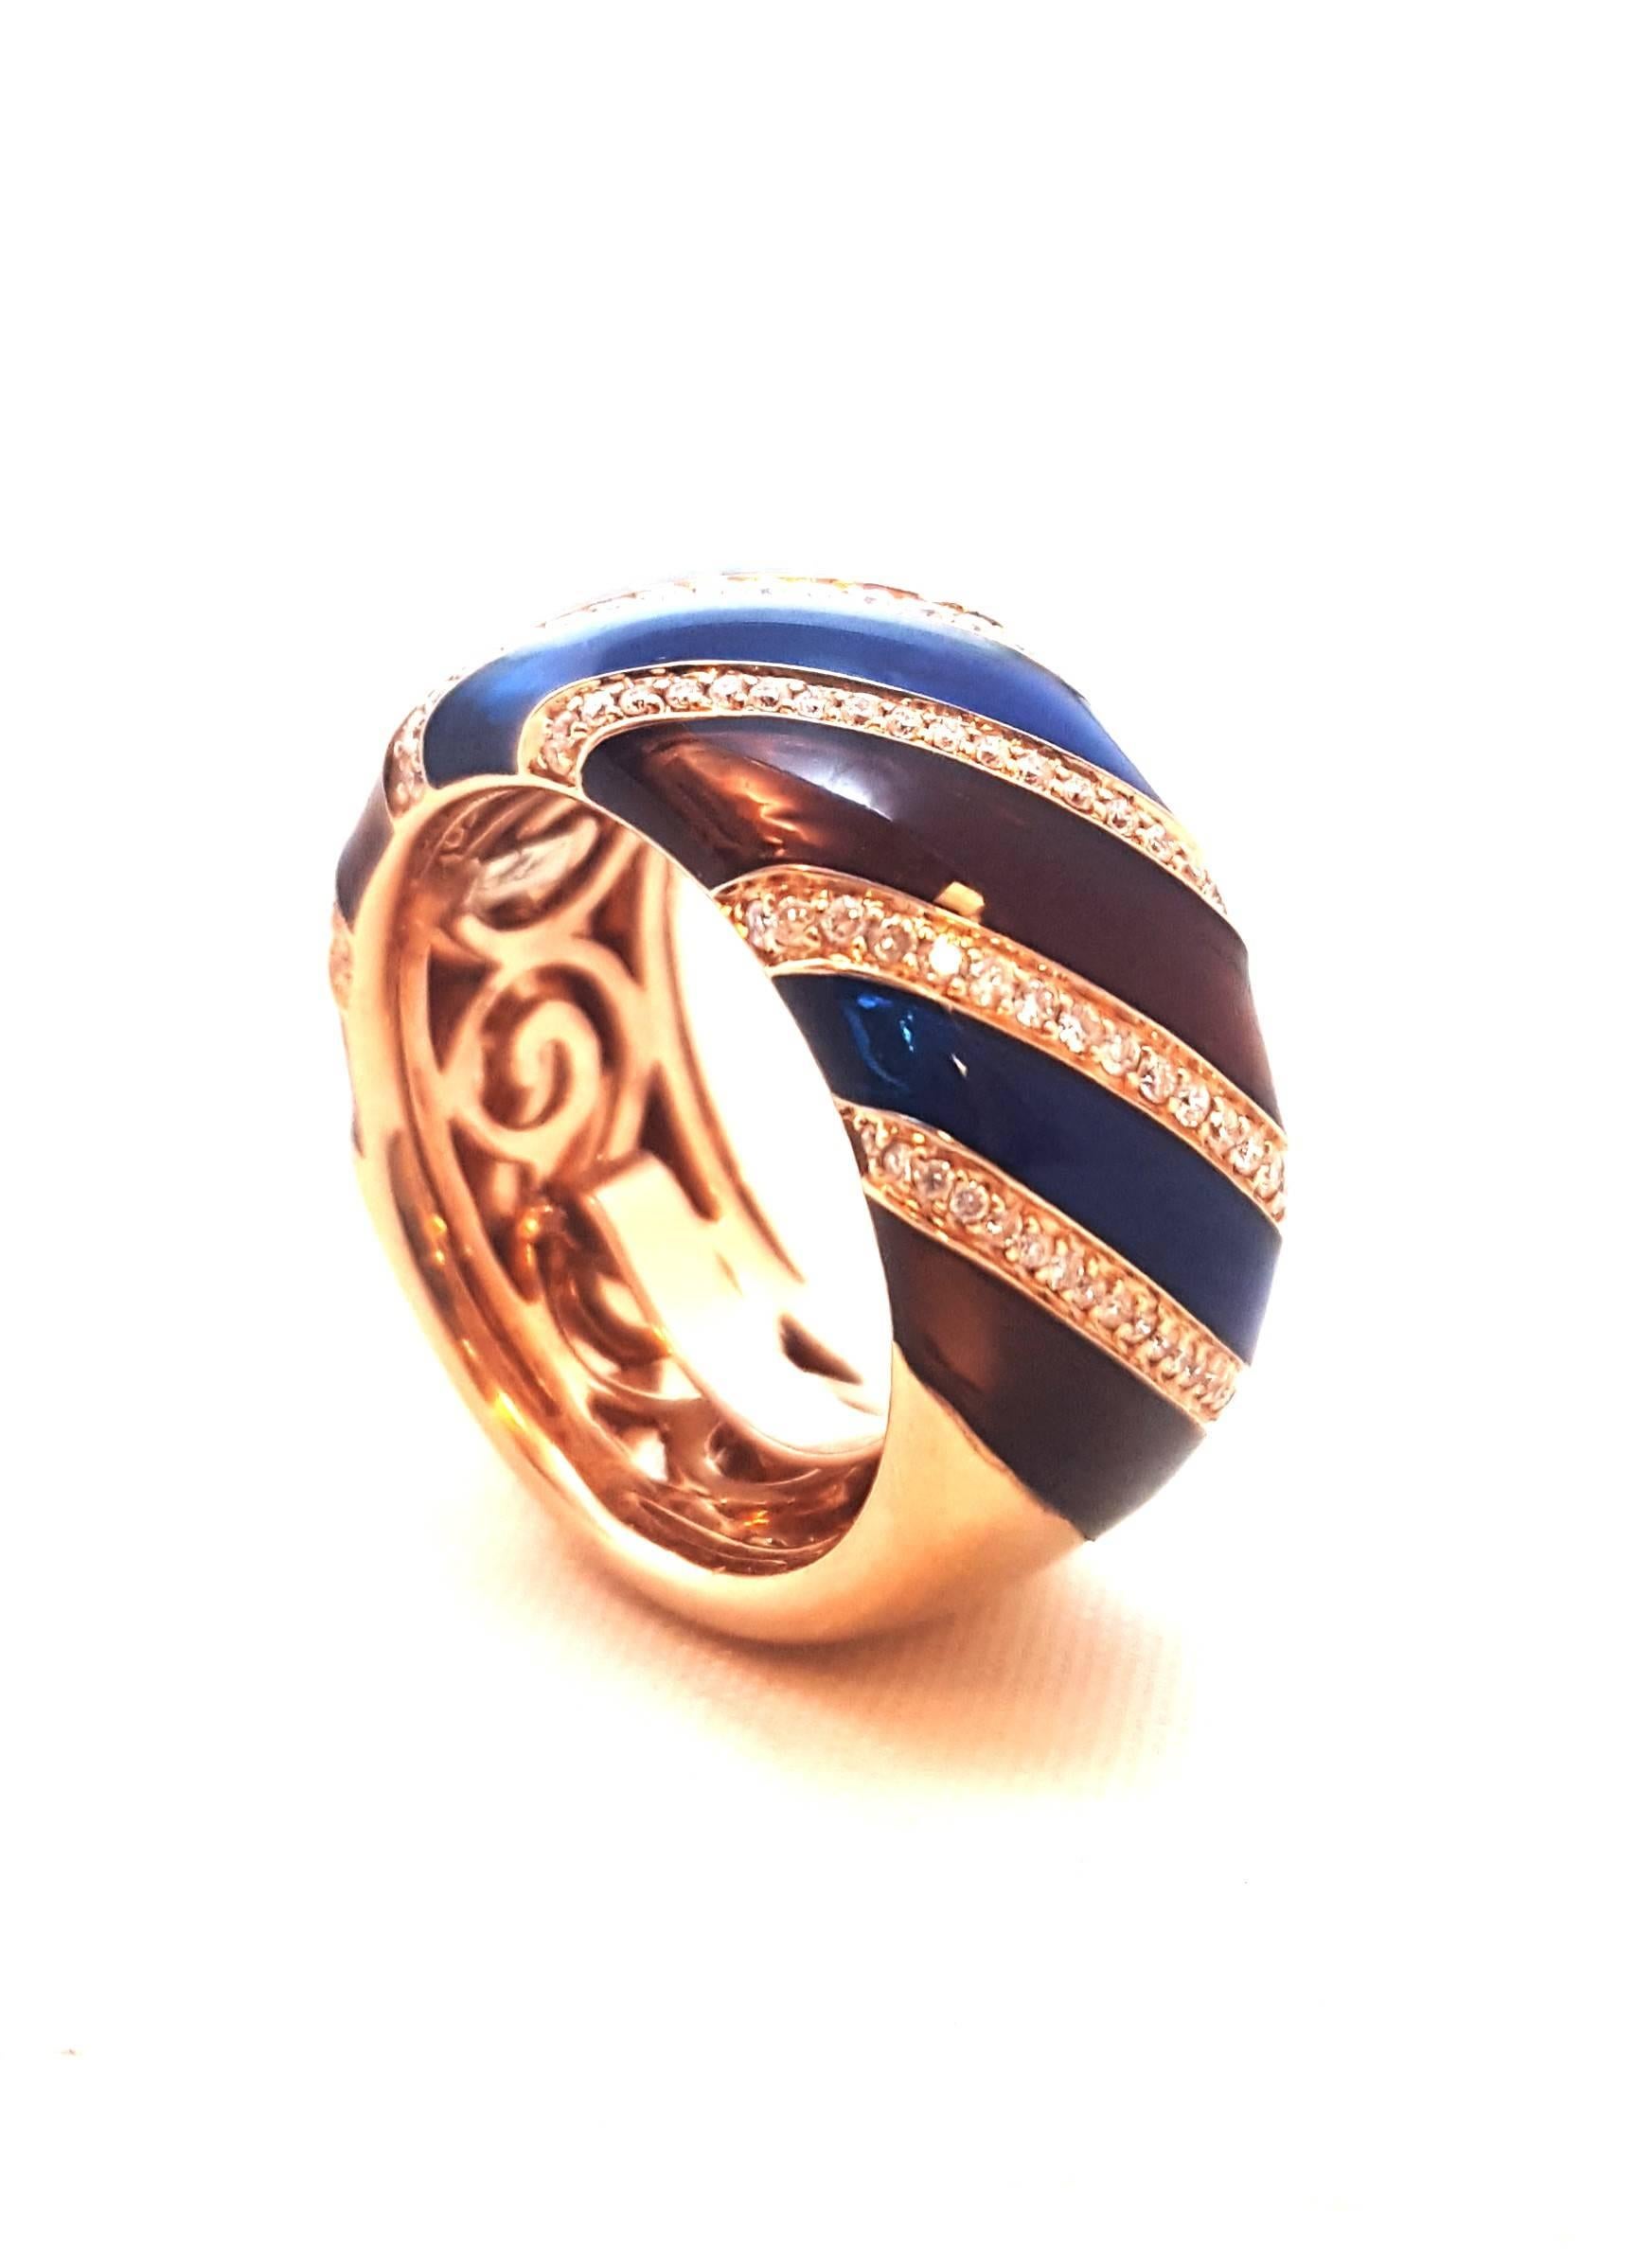 Unique, comfortable and oh, so beautiful!  This 18 karat rose gold band style ring is a festival of color!  The rose color lends itself perfectly to gracefully curved sections of cobalt blue and maroon enamel inserts.  Each insert is separated by a